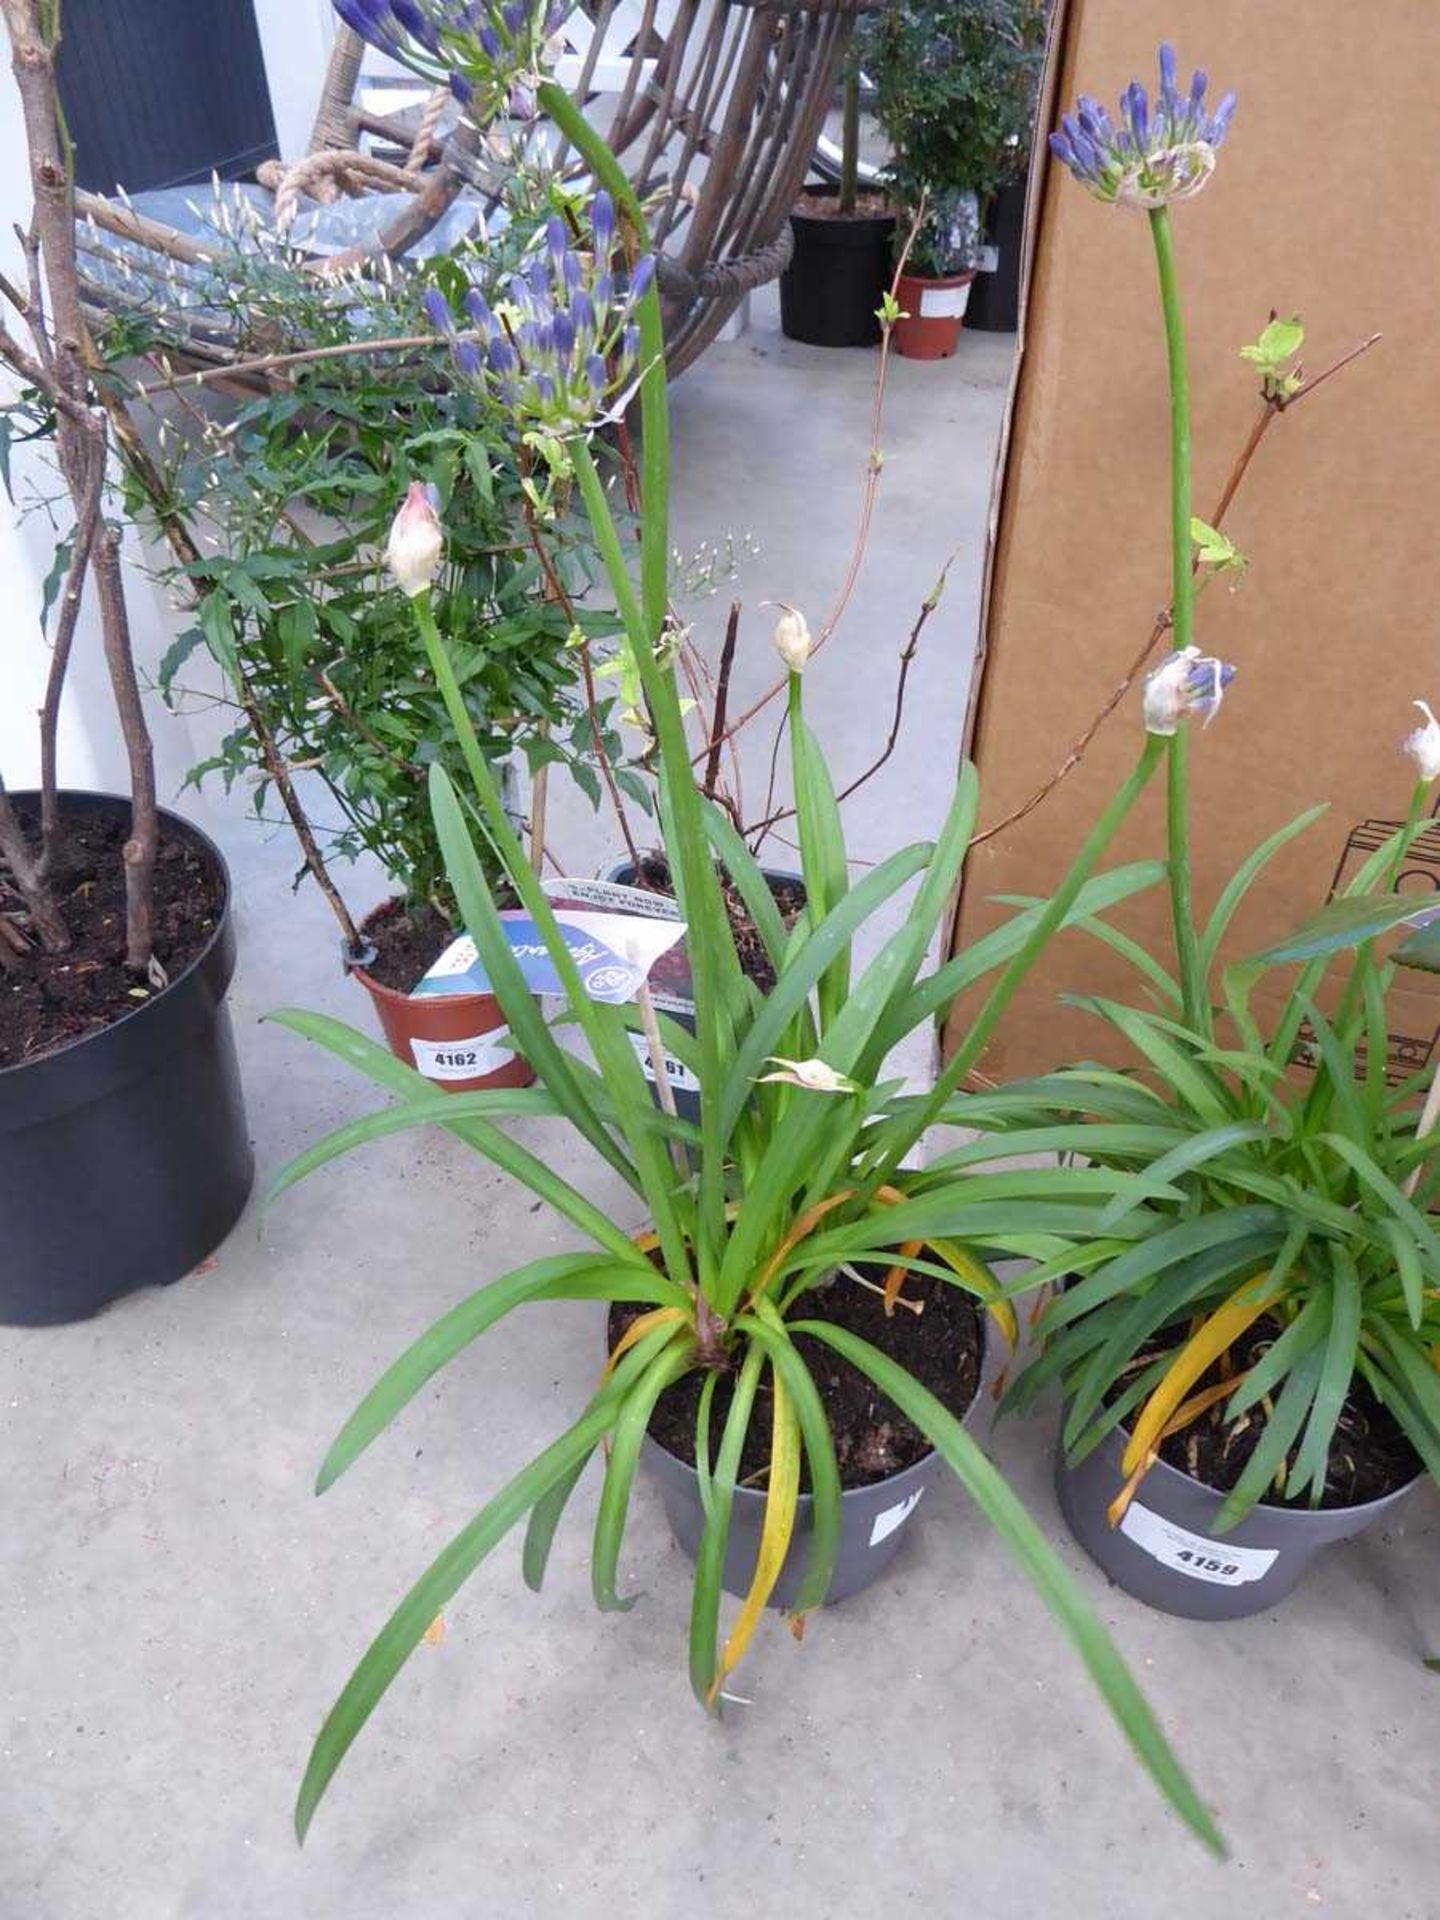 Potted Agapanthus